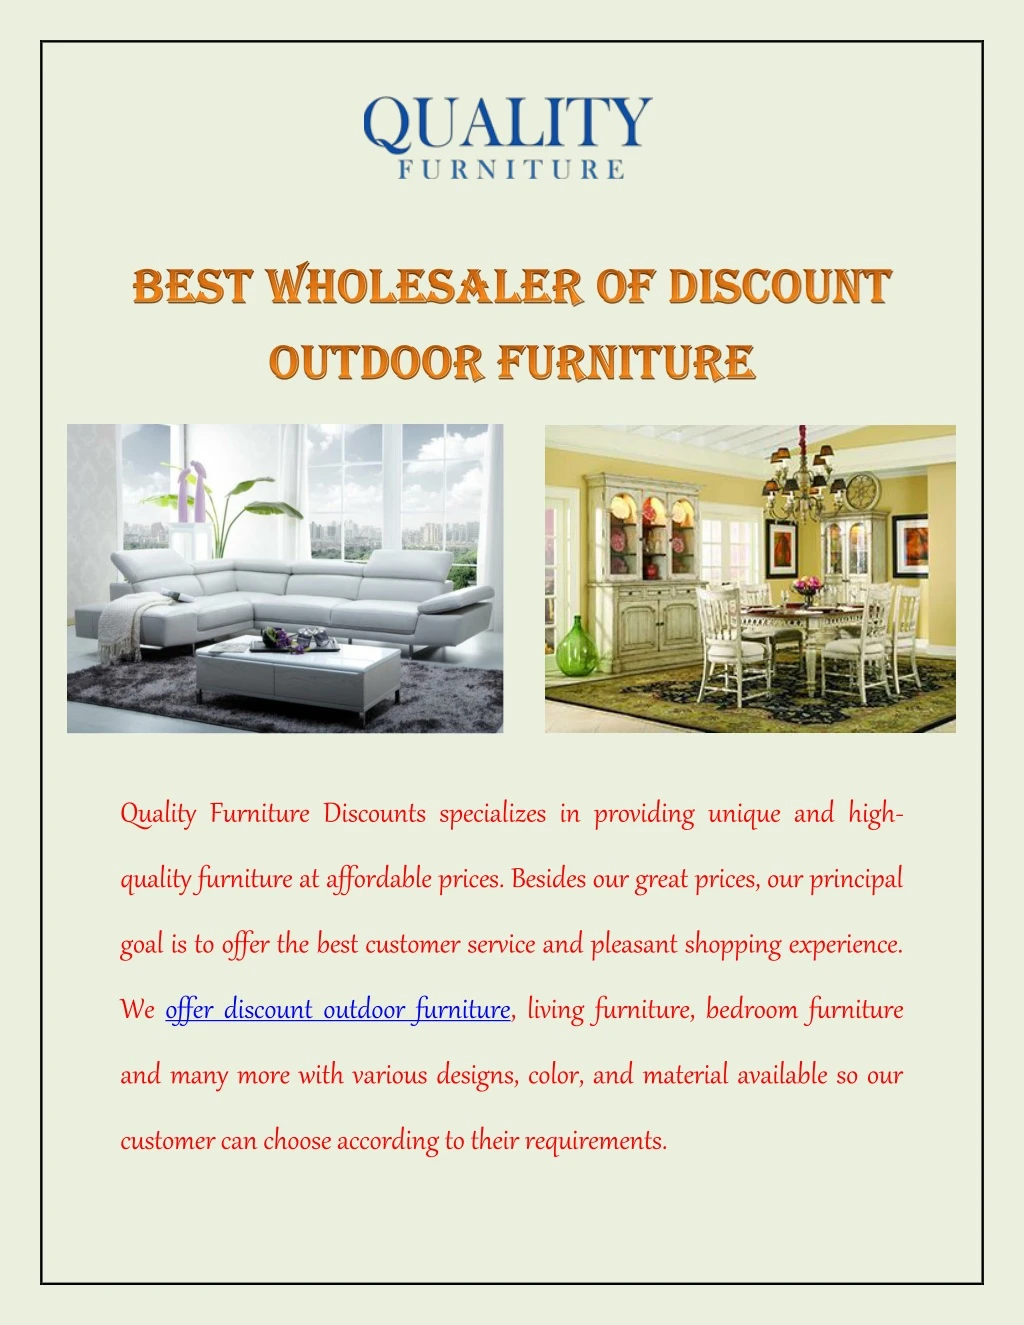 quality furniture discounts specializes